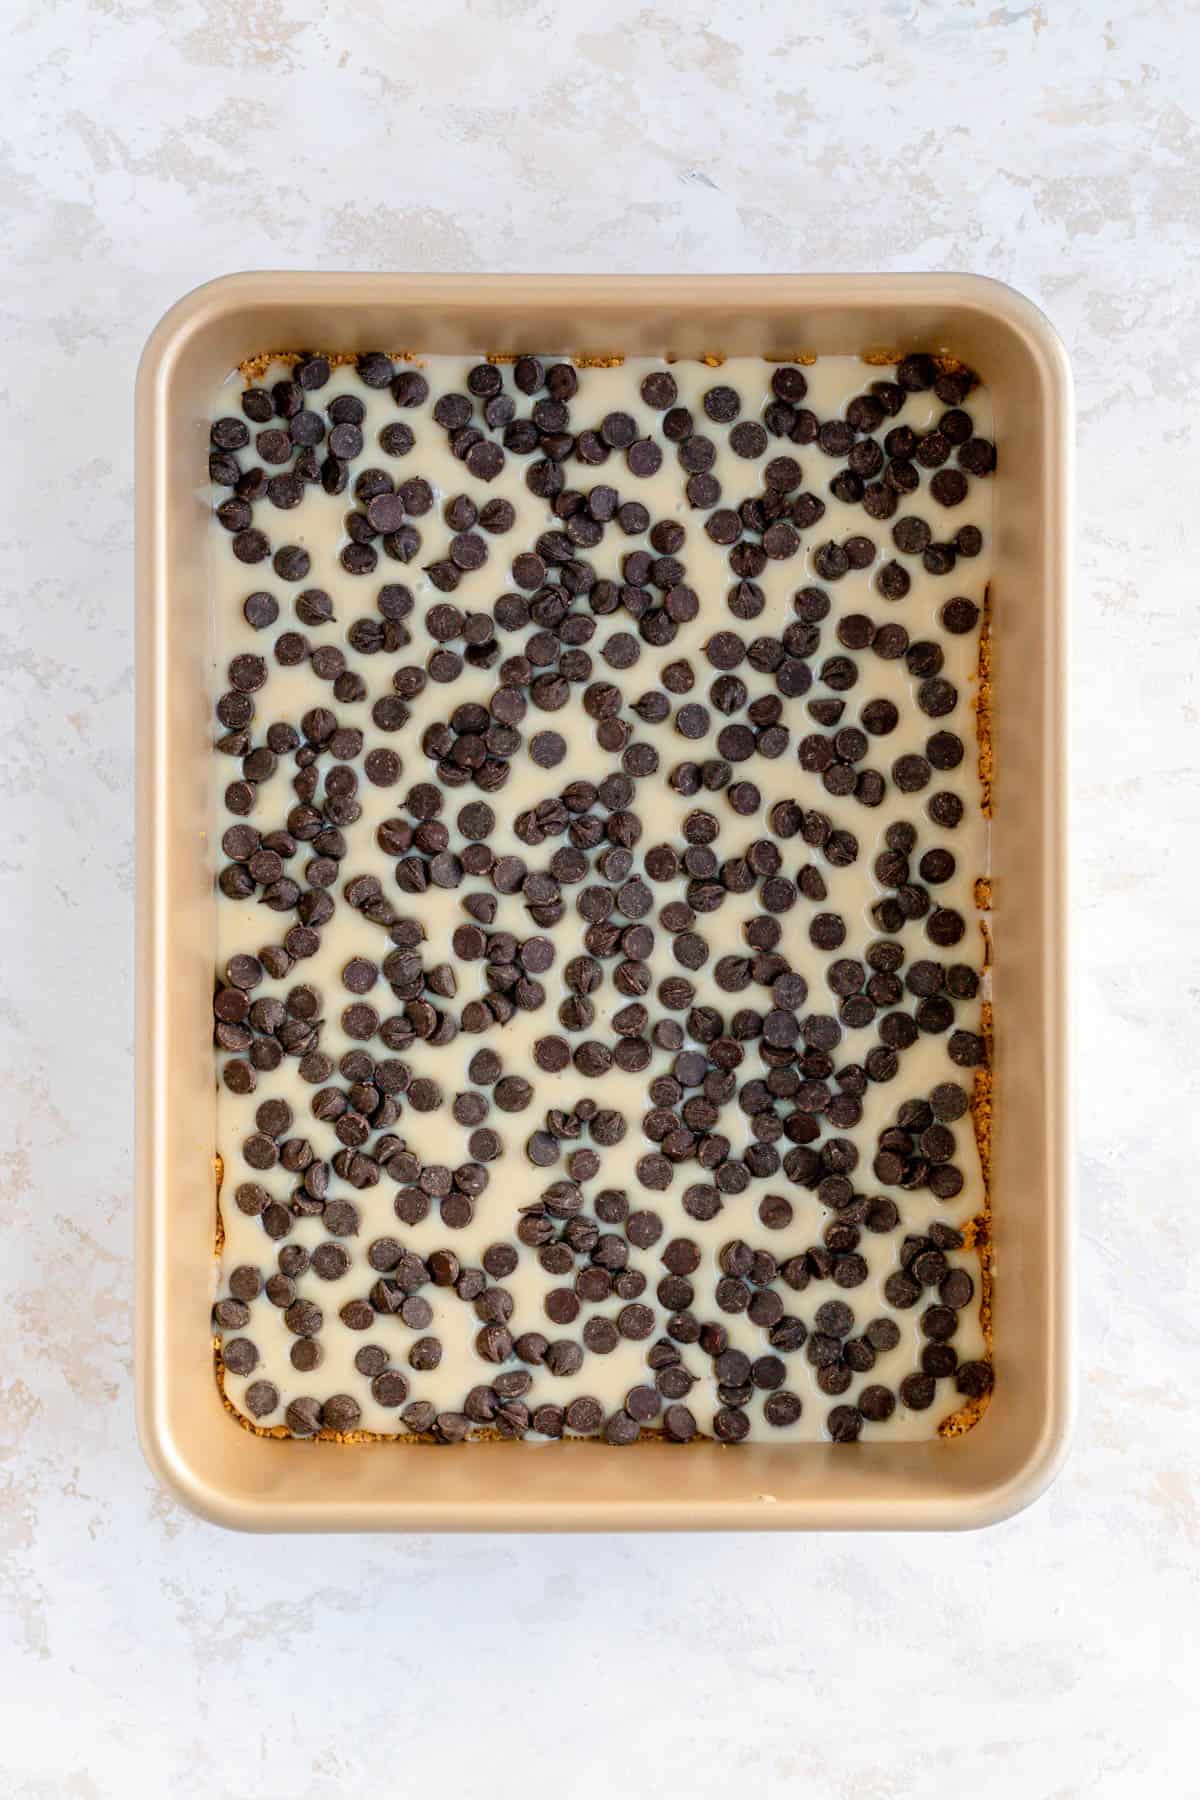 Chocolate chips in condensed milk in a 9 x 13 gold pan